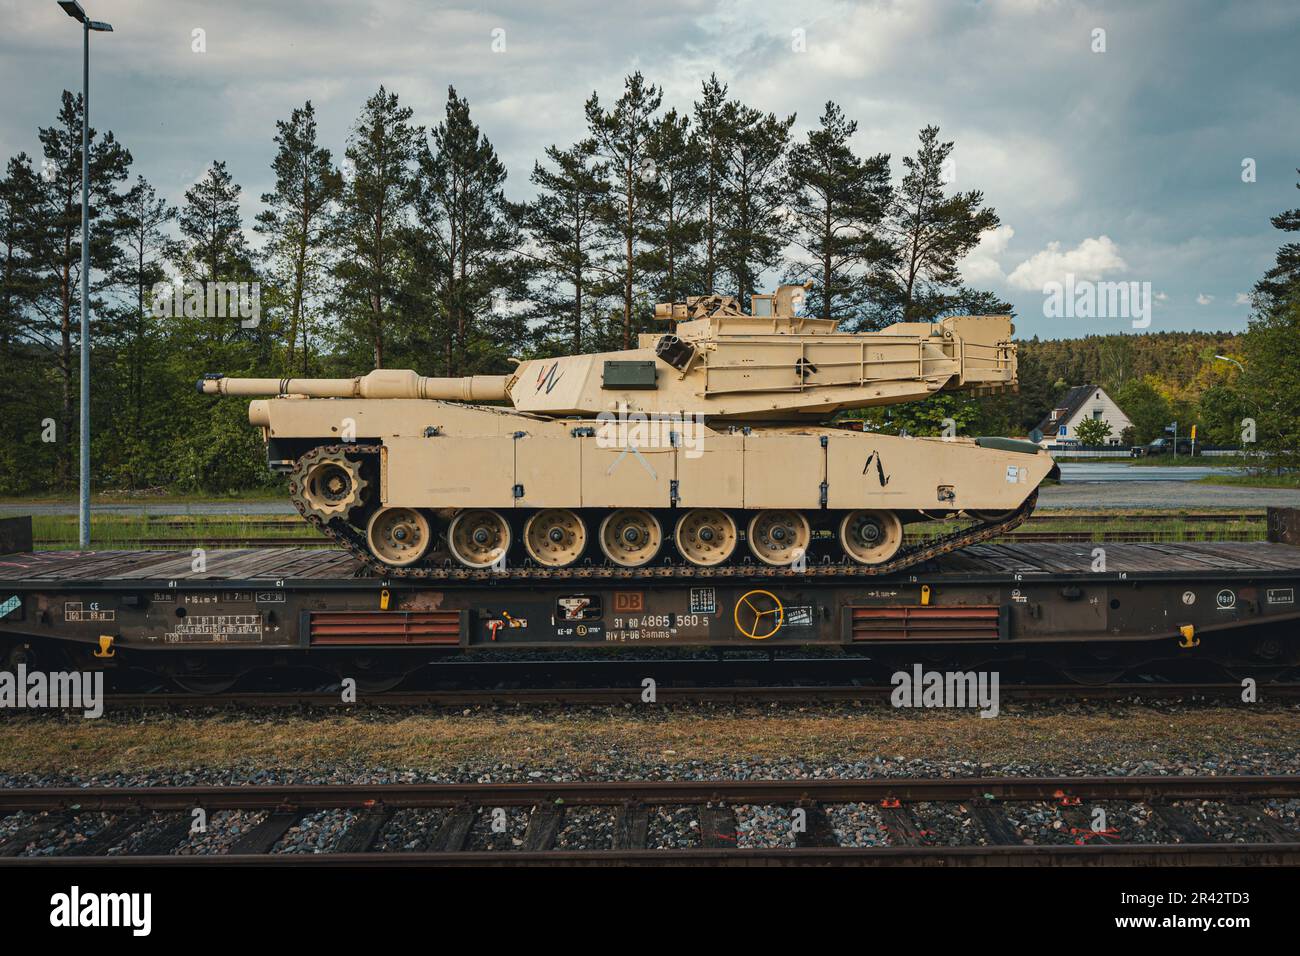 A U.S. M1A1 Abrams tank needed for training the Armed Forces of Ukraine awaits offloading at Grafenwoehr, Germany, May 14, 2023. The M1A1 training is expected to last several weeks and will include live fire, crew qualification, maneuver, and maintainer training. Armed Forces of Ukraine training is conducted by 7th Army Training Command at Grafenwoehr and Hohenfels training areas in Germany on behalf of U.S. Army Europe and Africa. (U.S. Army photo by Spc. Christian Carrillo) Stock Photo